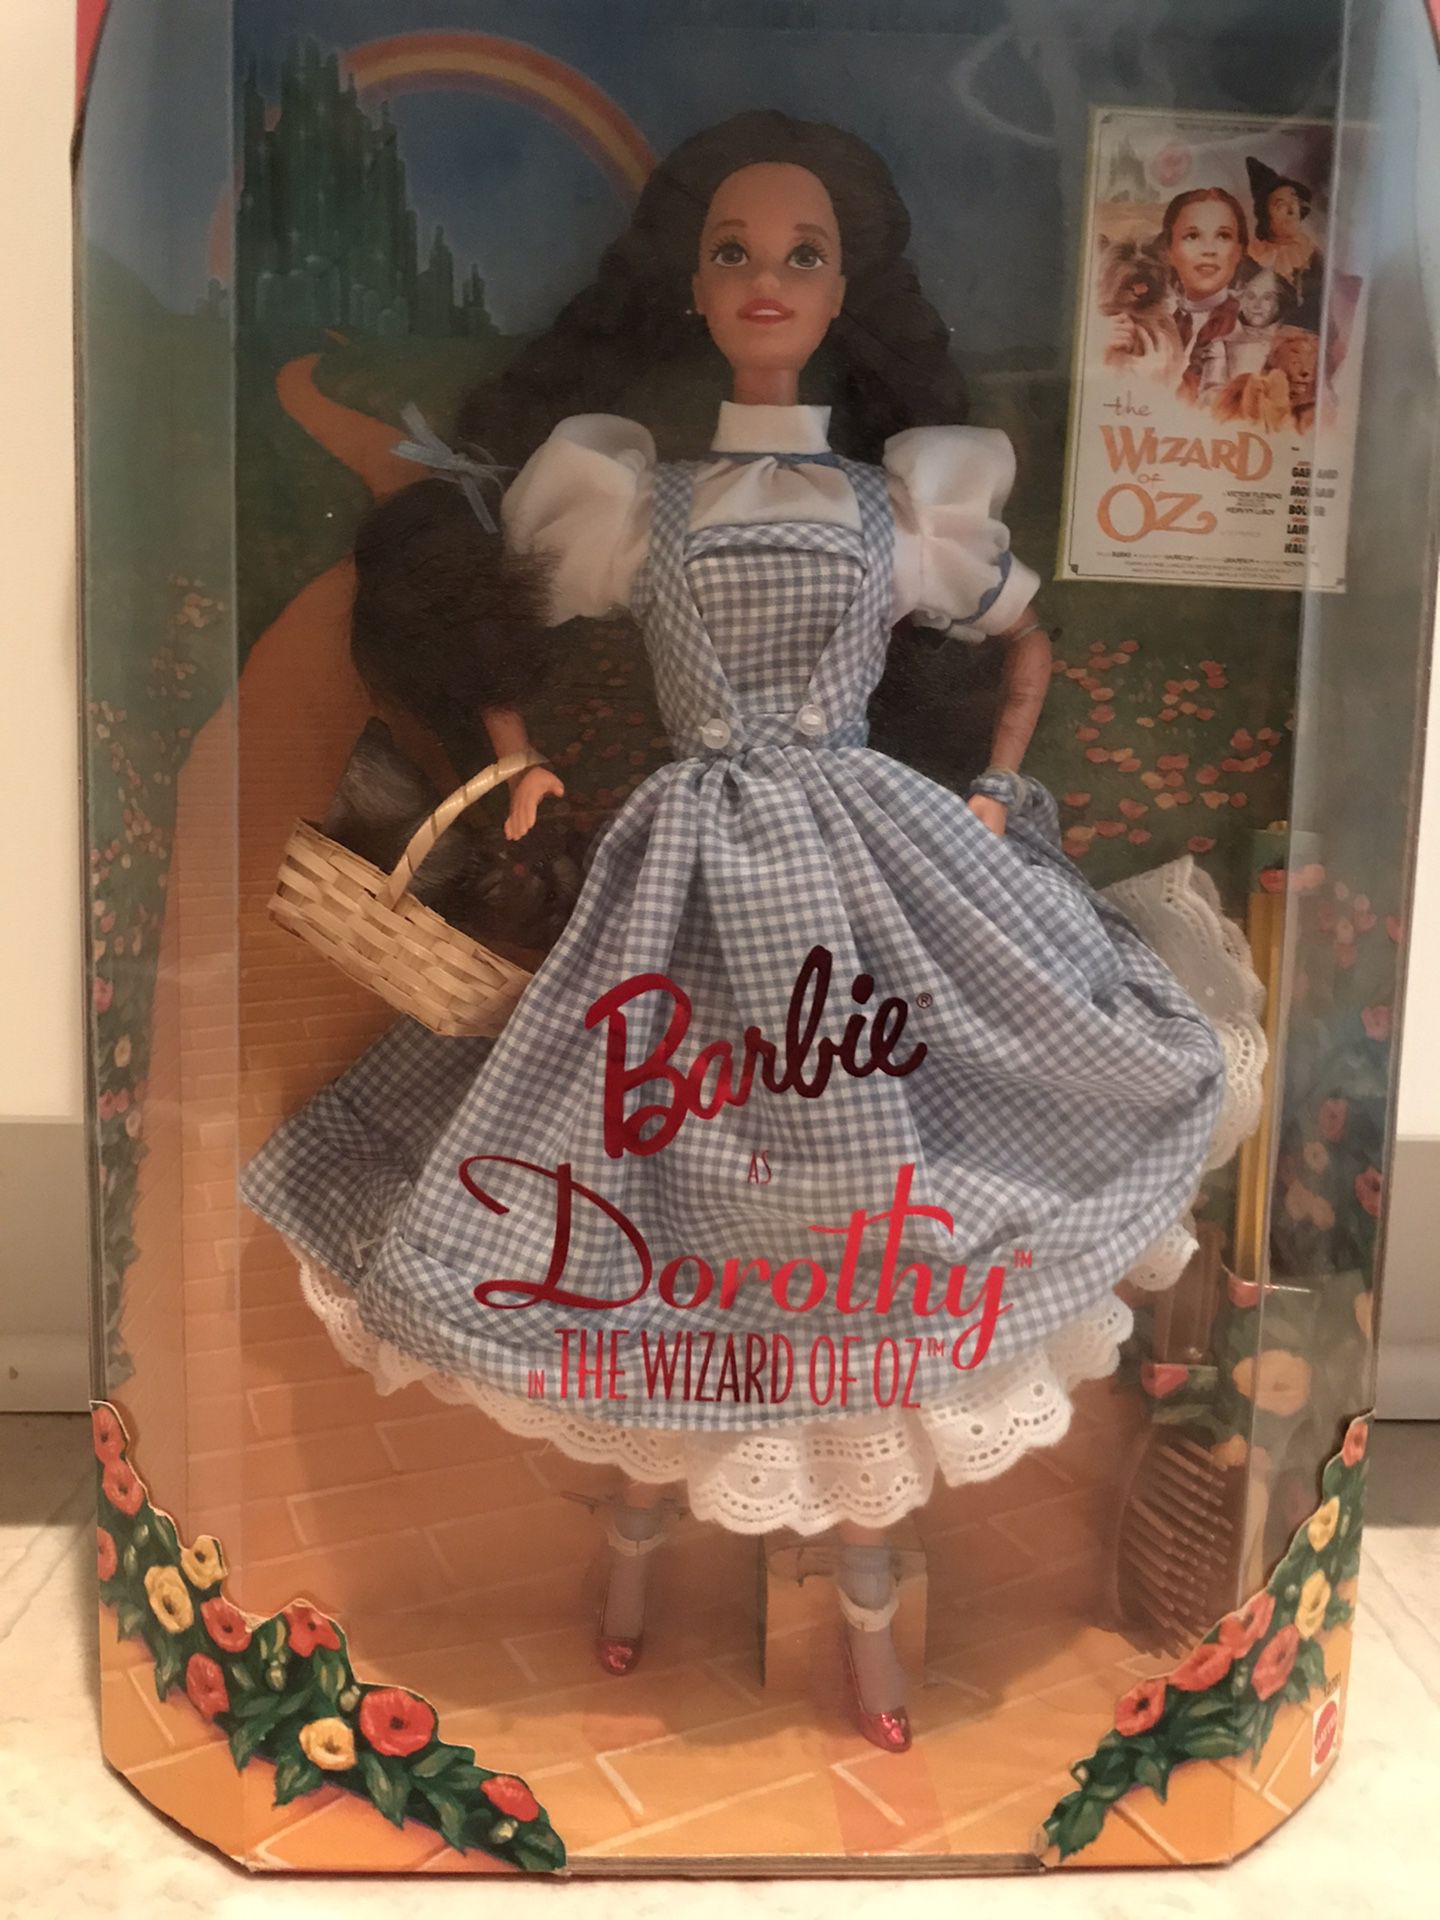 Dorothy in the WIZARD of OZ BaRbie doll